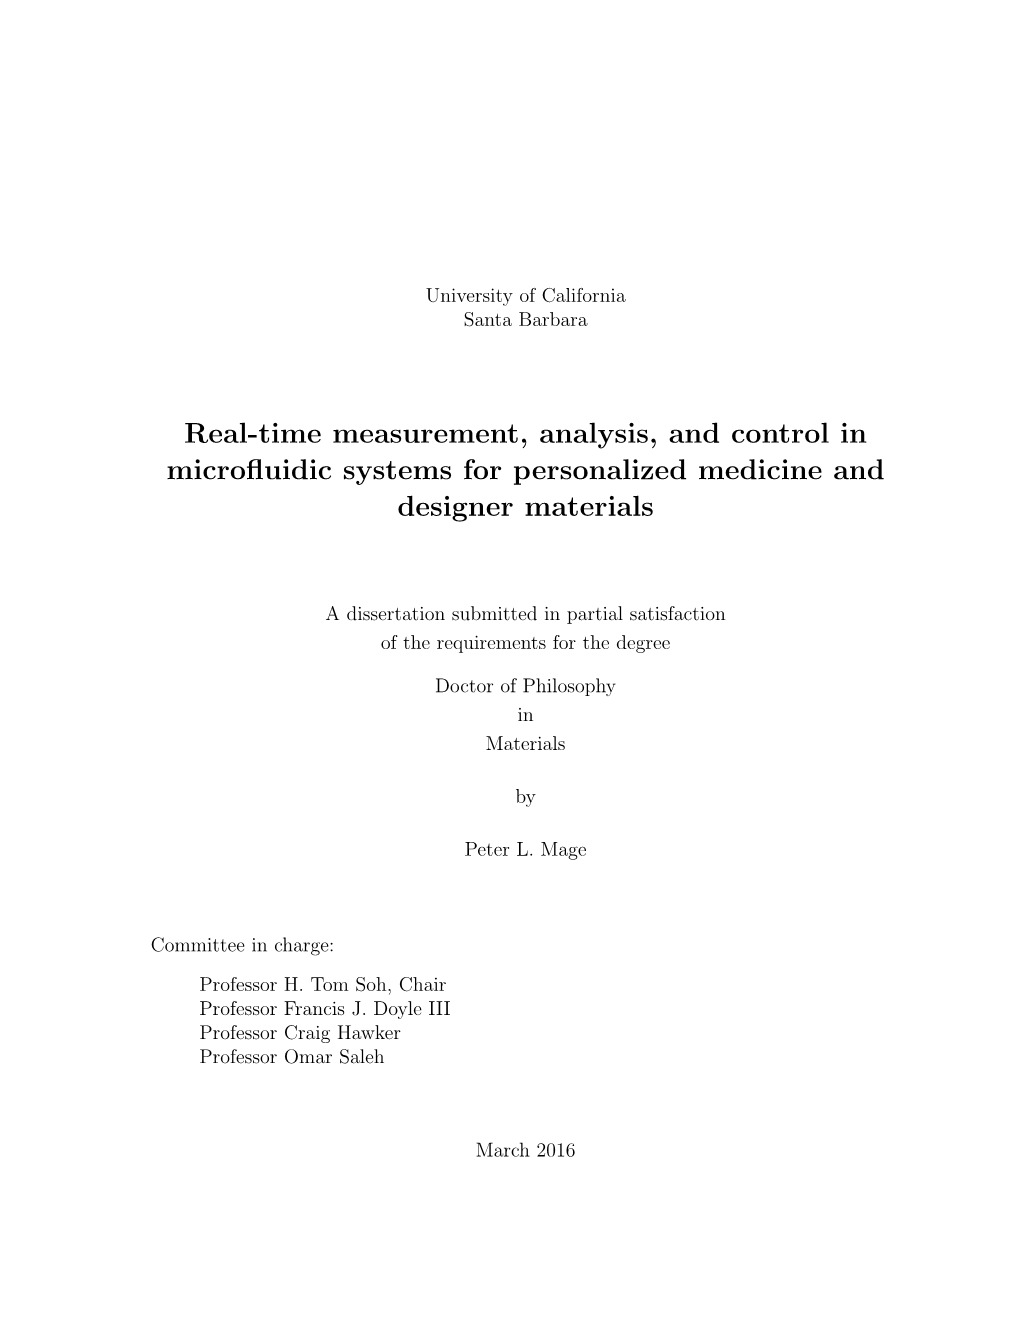 Real-Time Measurement, Analysis, and Control in Microfluidic Systems For